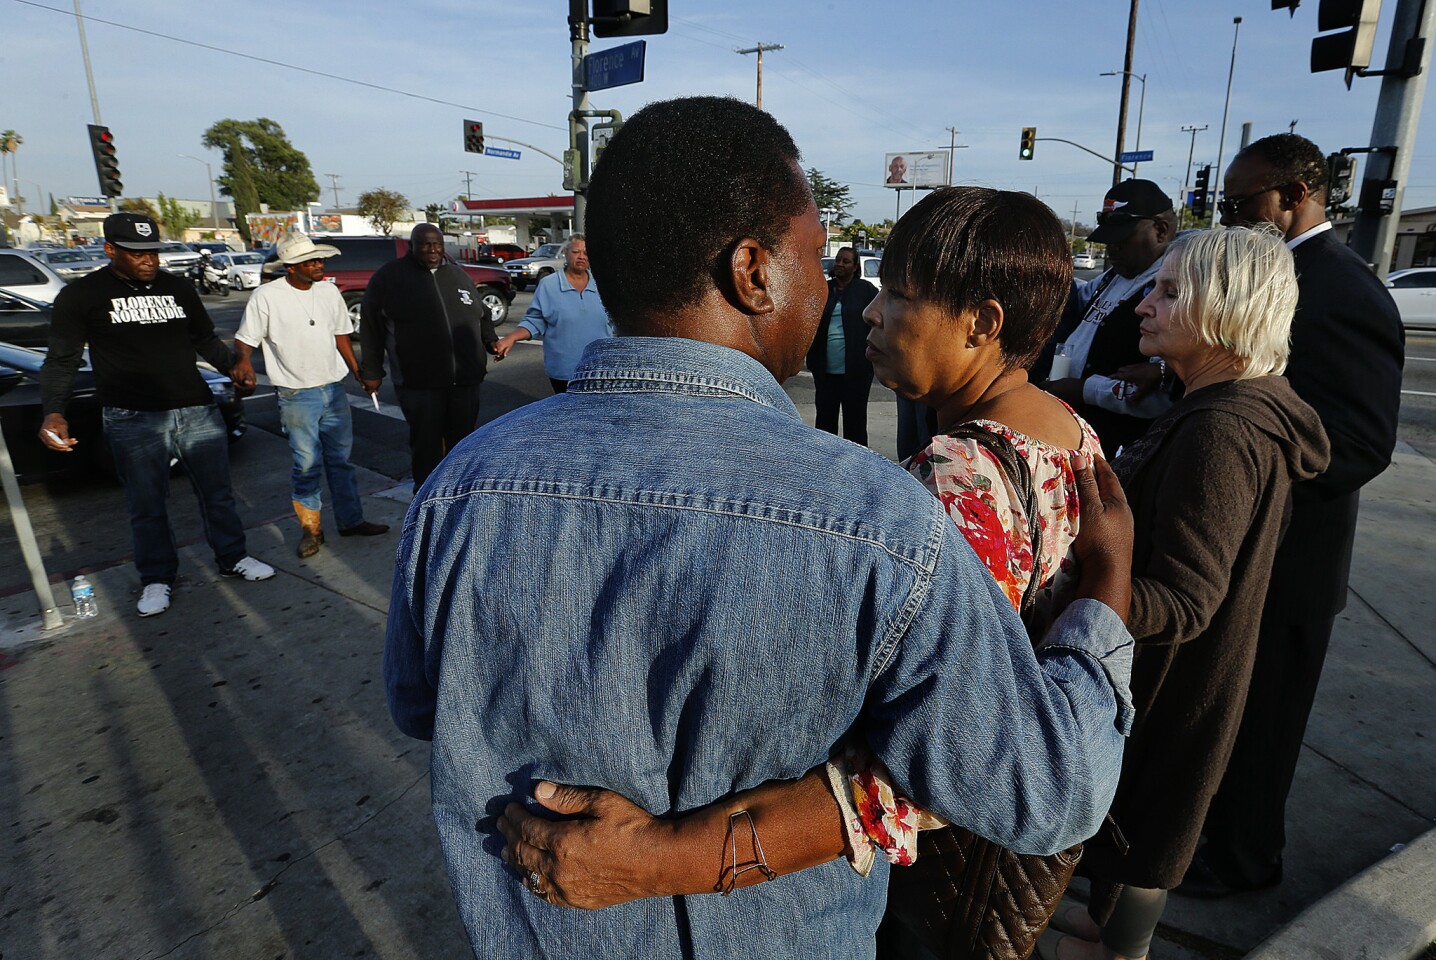 David Bryant, foreground, and his ex-wife Denise Harlins, the uncle and aunt of Latasha Harlins, at a vigil at Florence and Normandie avenues, the intersection at the center of the 1992 L.A. riots.